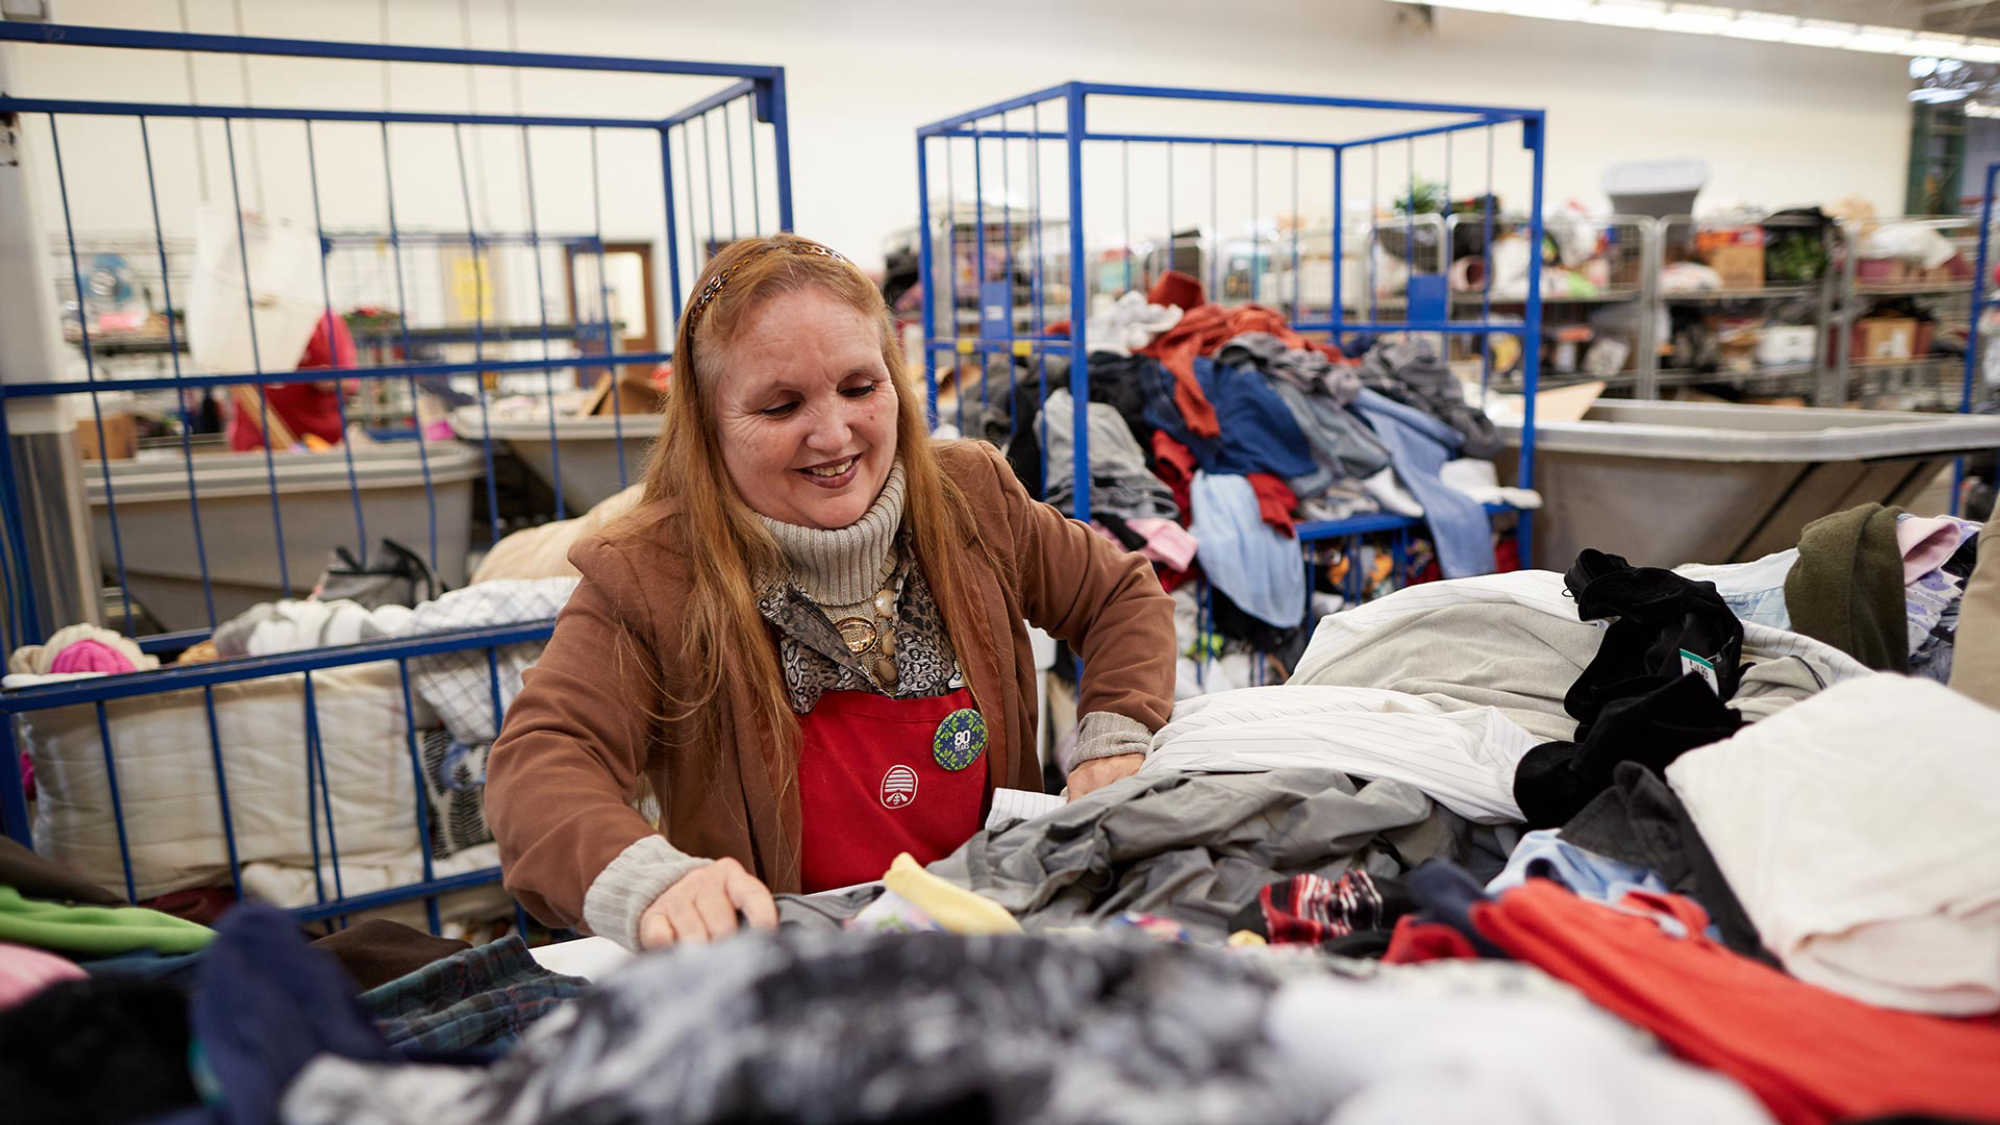 Associate Janice sorts clothes at Deseret Industries